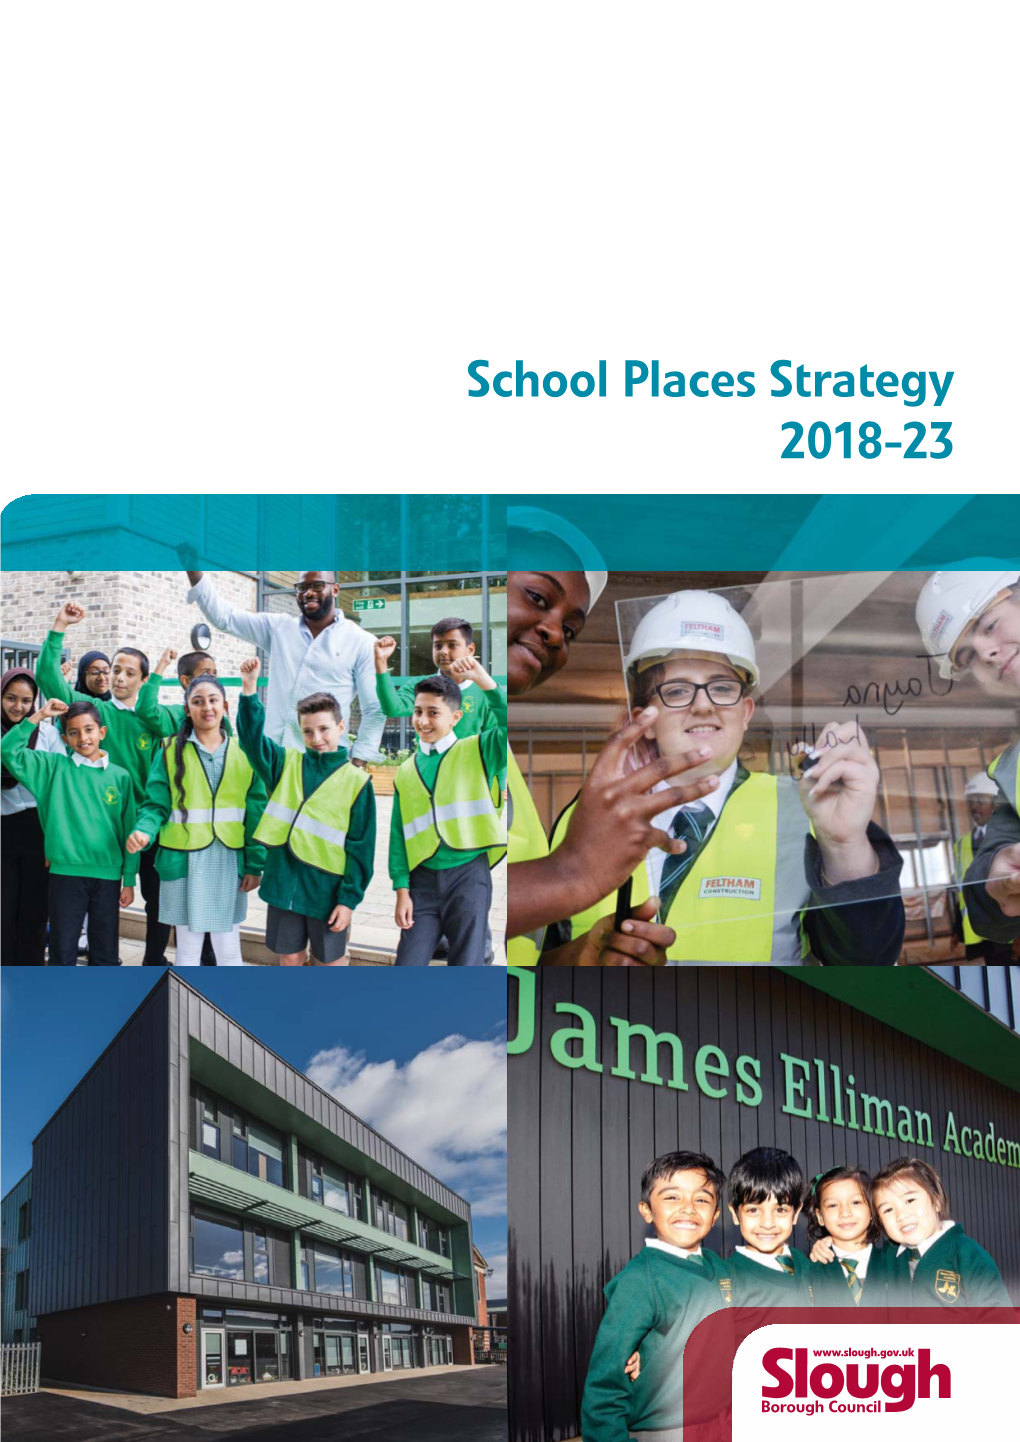 School Places Strategy 2018-23